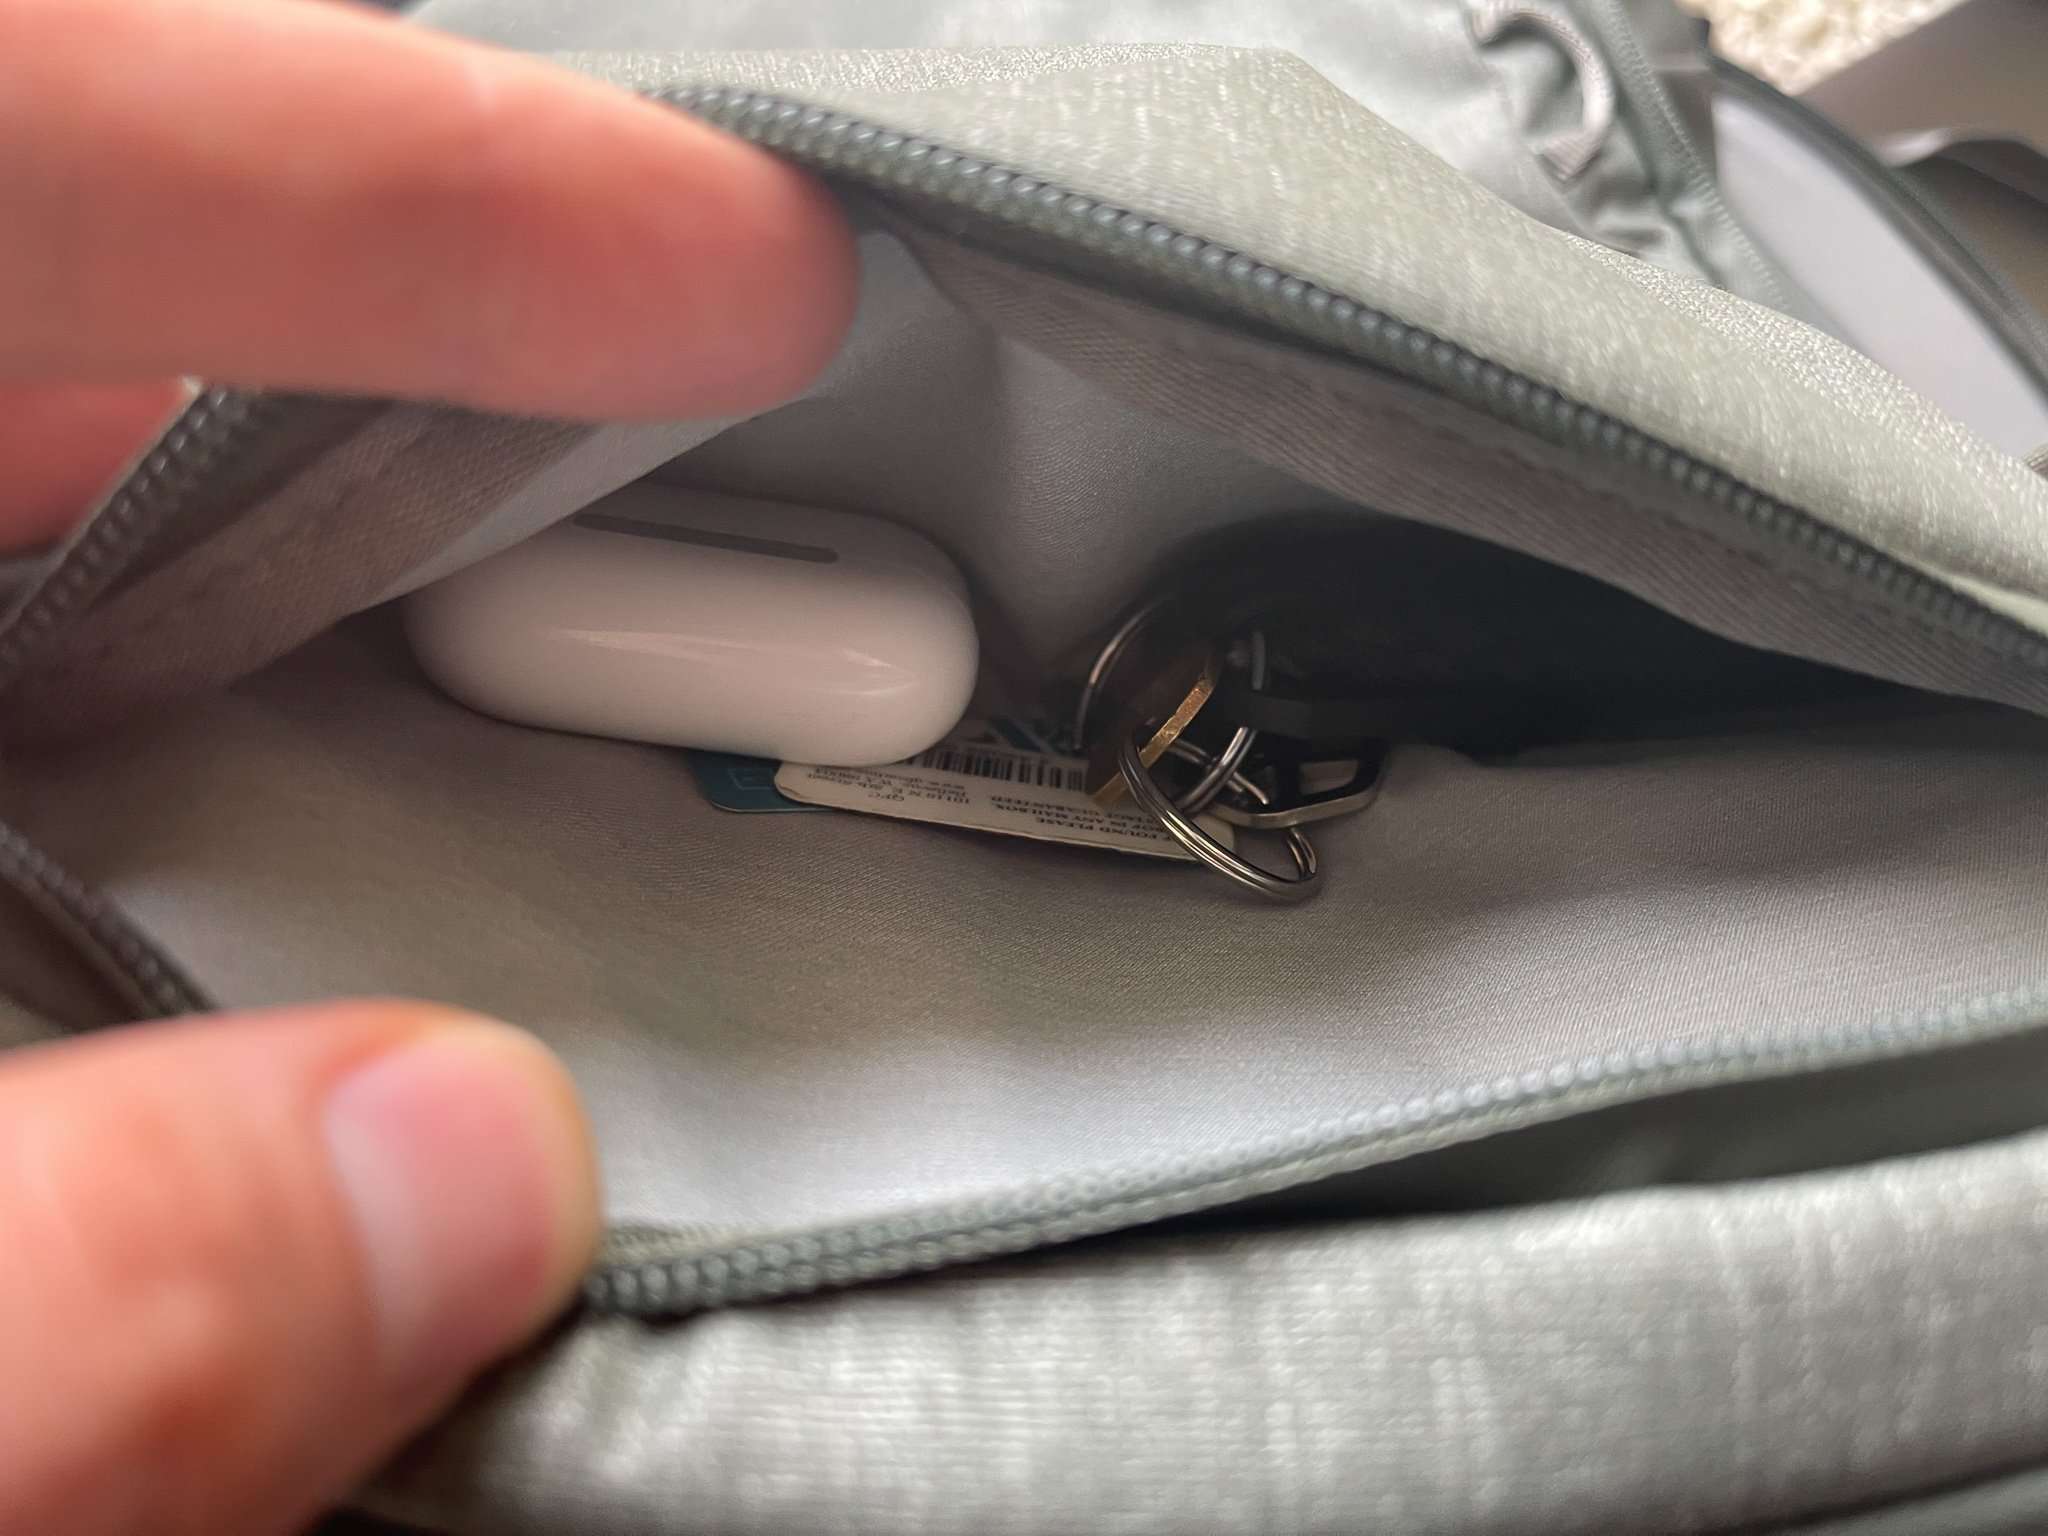 The single quick access pocket on the Peak Design Travel Backpack is pretty small